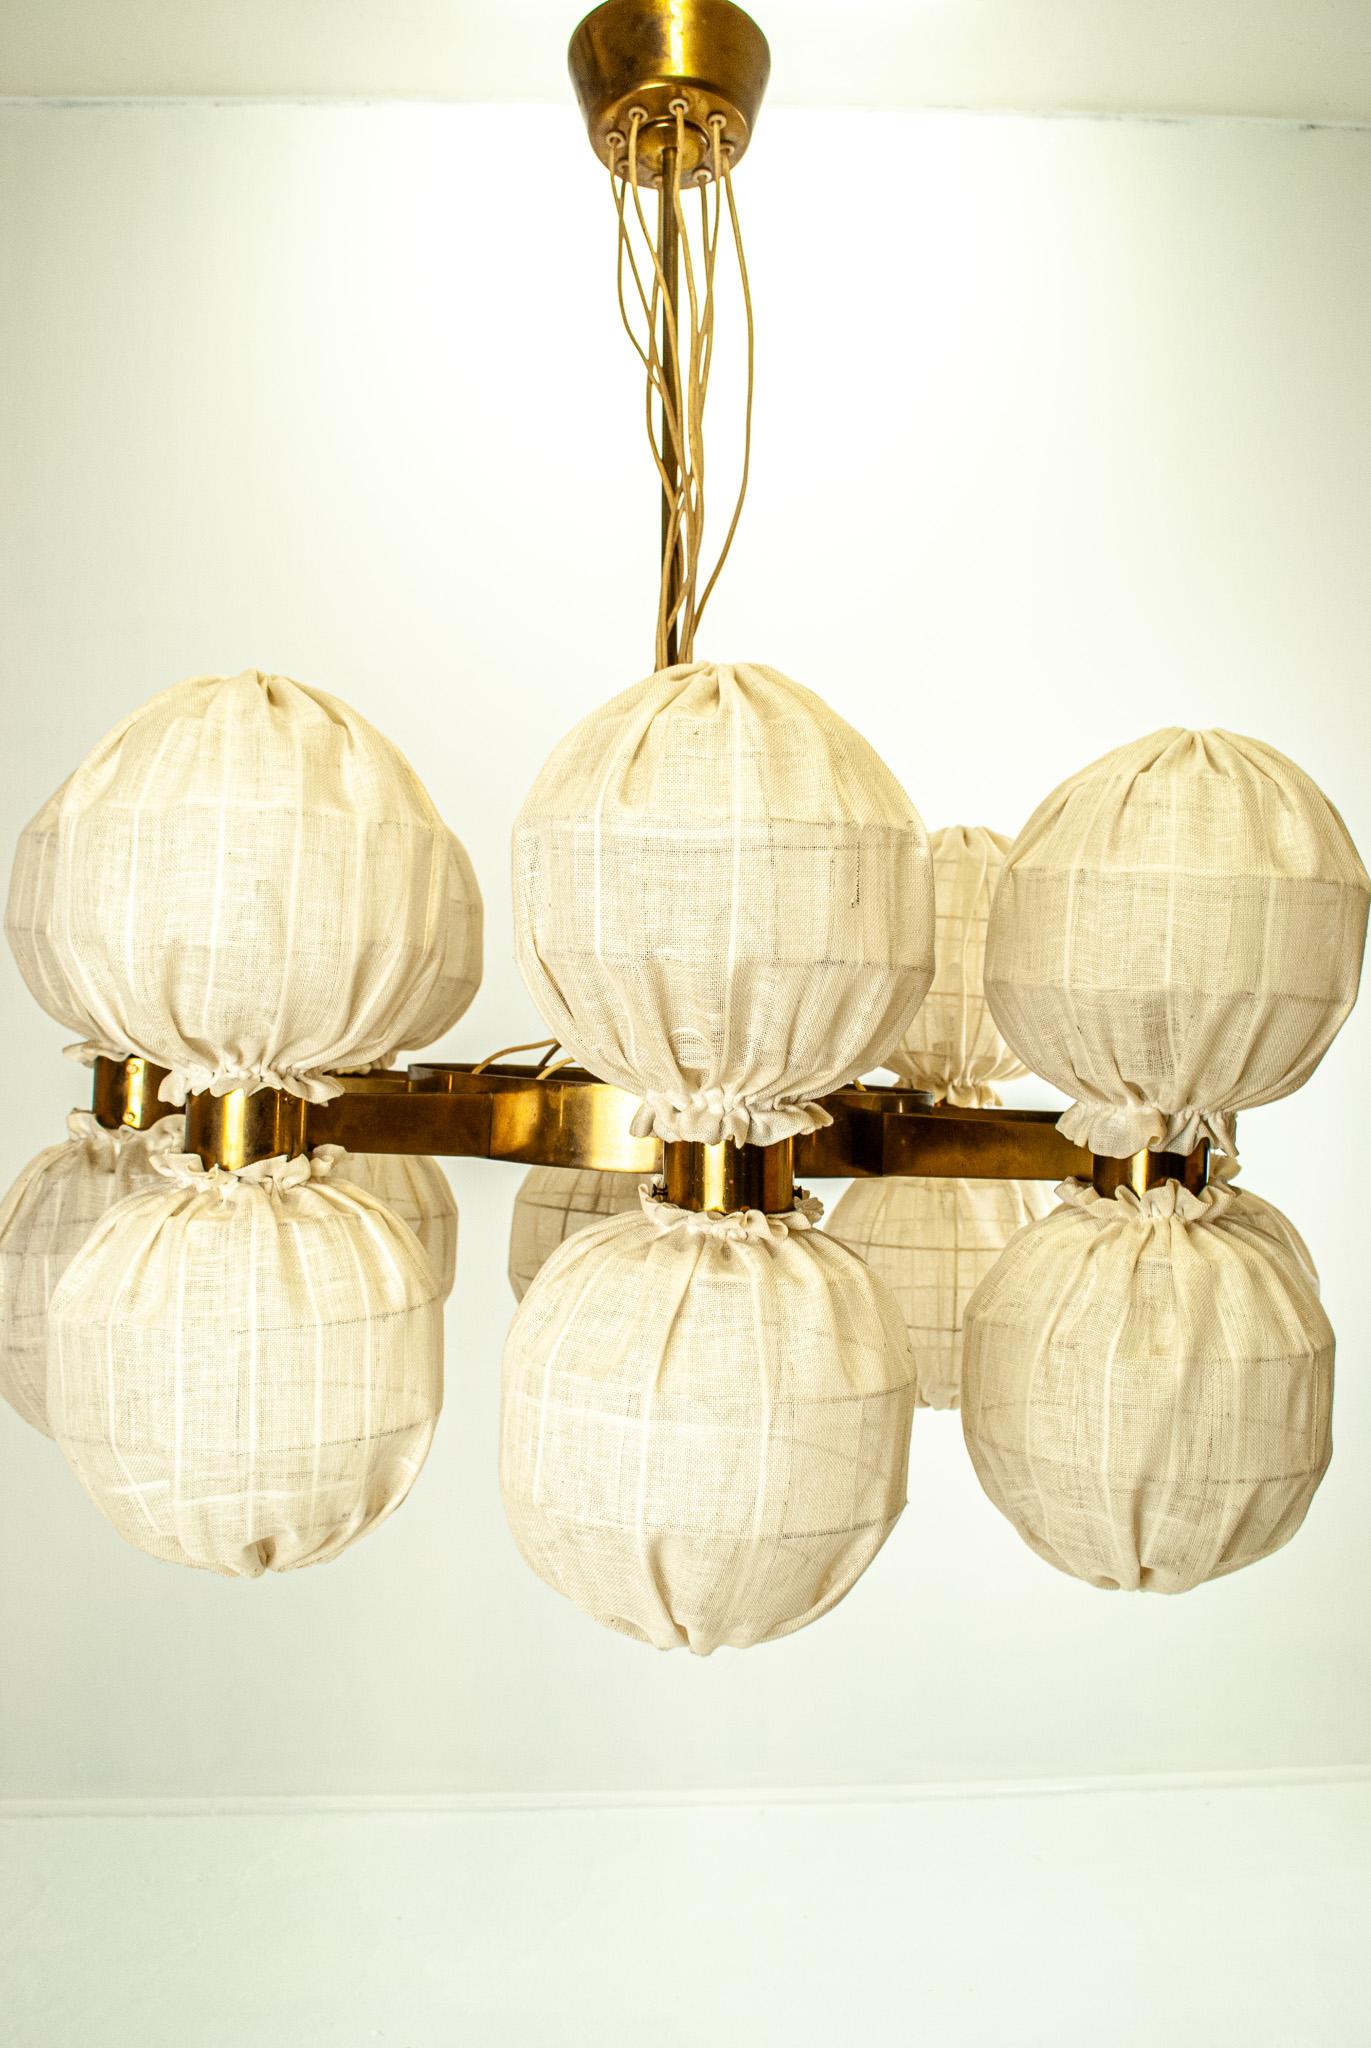 Very rare ceilinglamp by Hans-Agne Jakobsson in brass an fabric. 